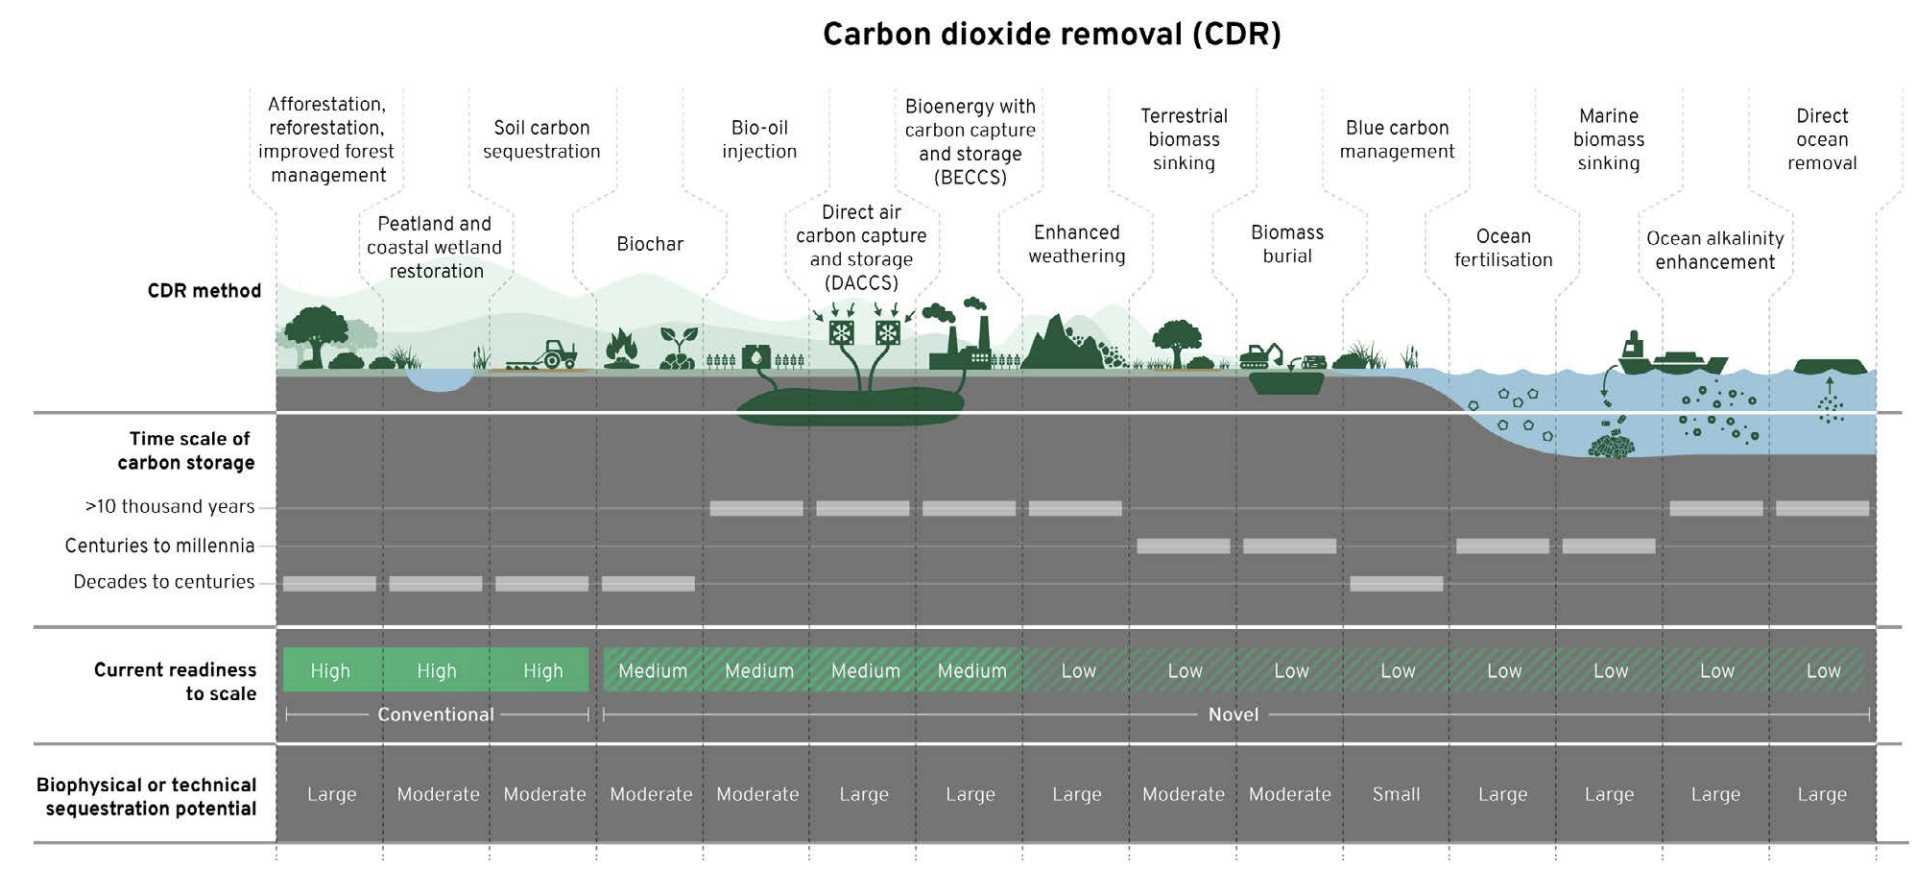 A classification of CDR methods and technologies, according to time scale of carbon storage, current readiness to scale, and biophysical or technical sequestration potential. Source: Graphic (https://10insightsclimate.science/wp-content/uploads/2023/12/10NICS-2023-Report_digital.pdf) by Future Earth, The Earth League, and the World Climate Research Program, used under a fair use rationale.